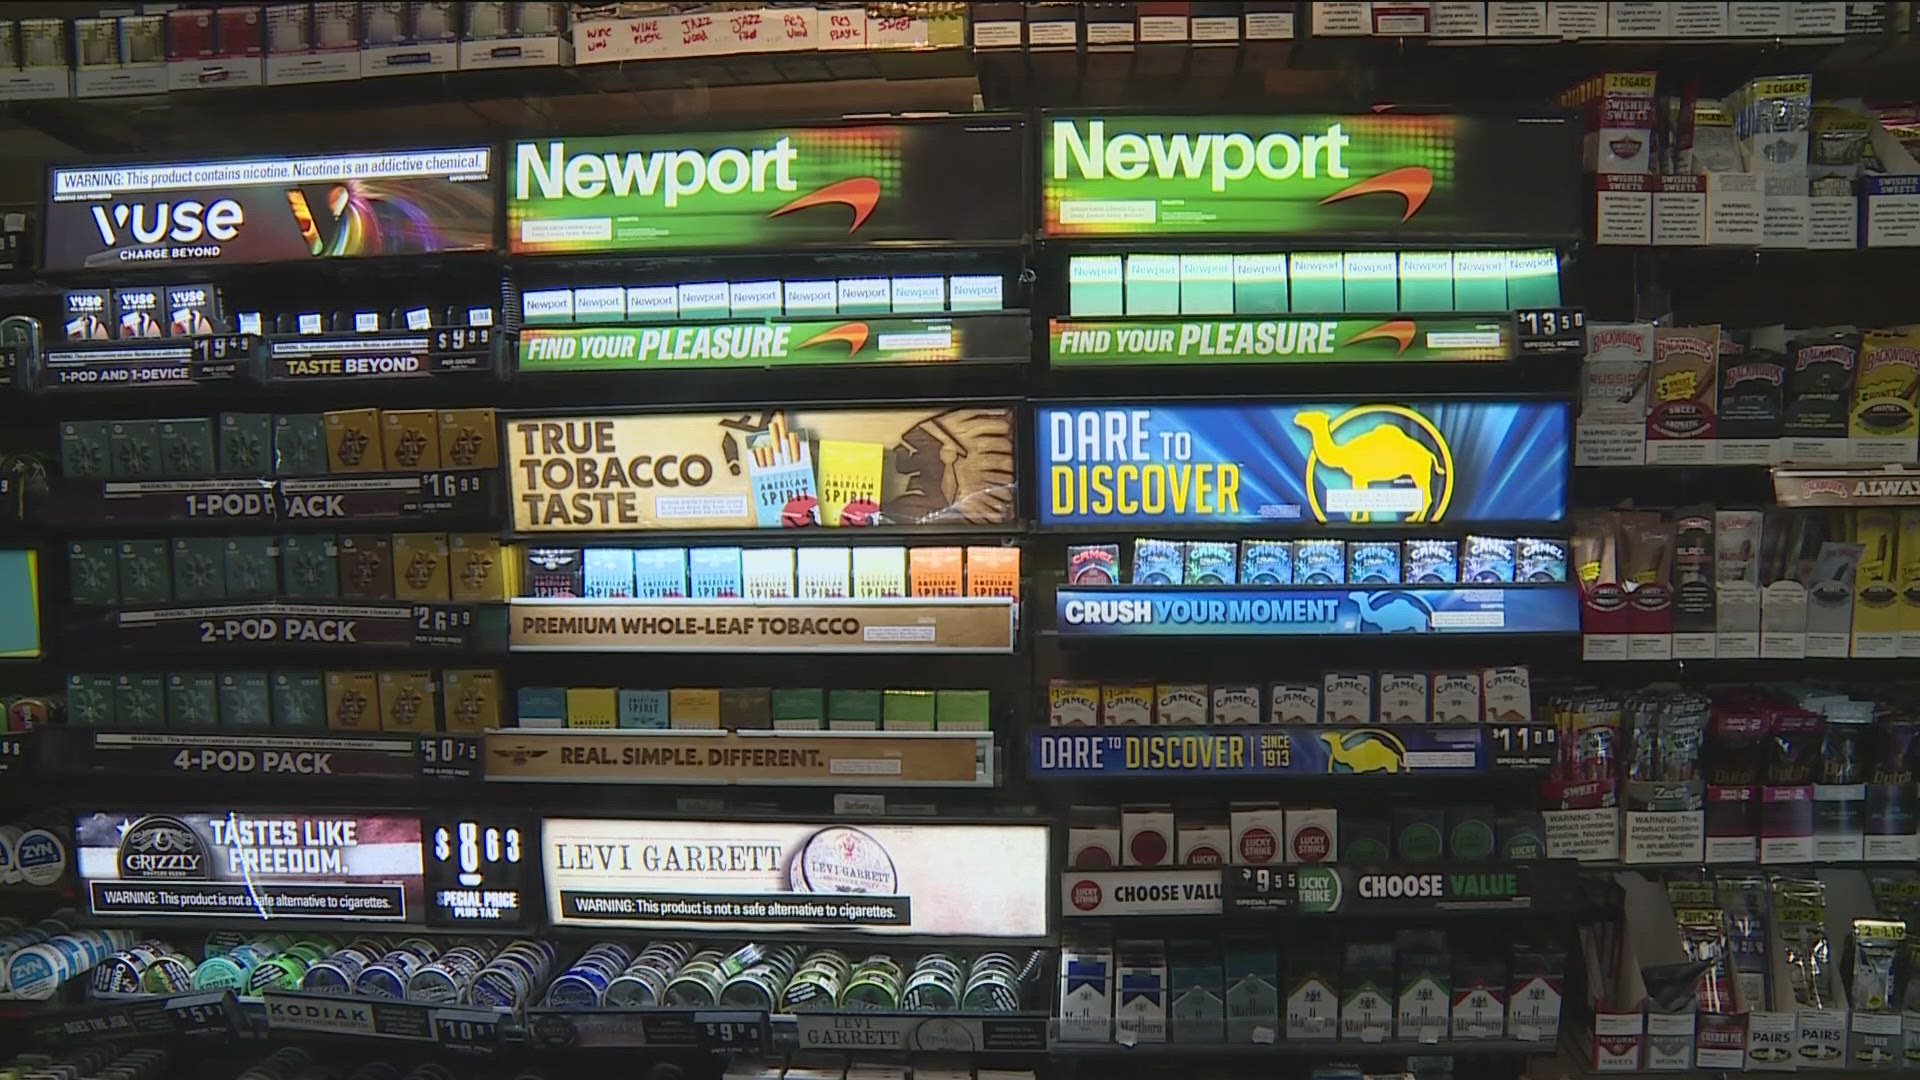 The Minneapolis City Council approved a new citywide $15 minimum price for a pack of cigarettes.